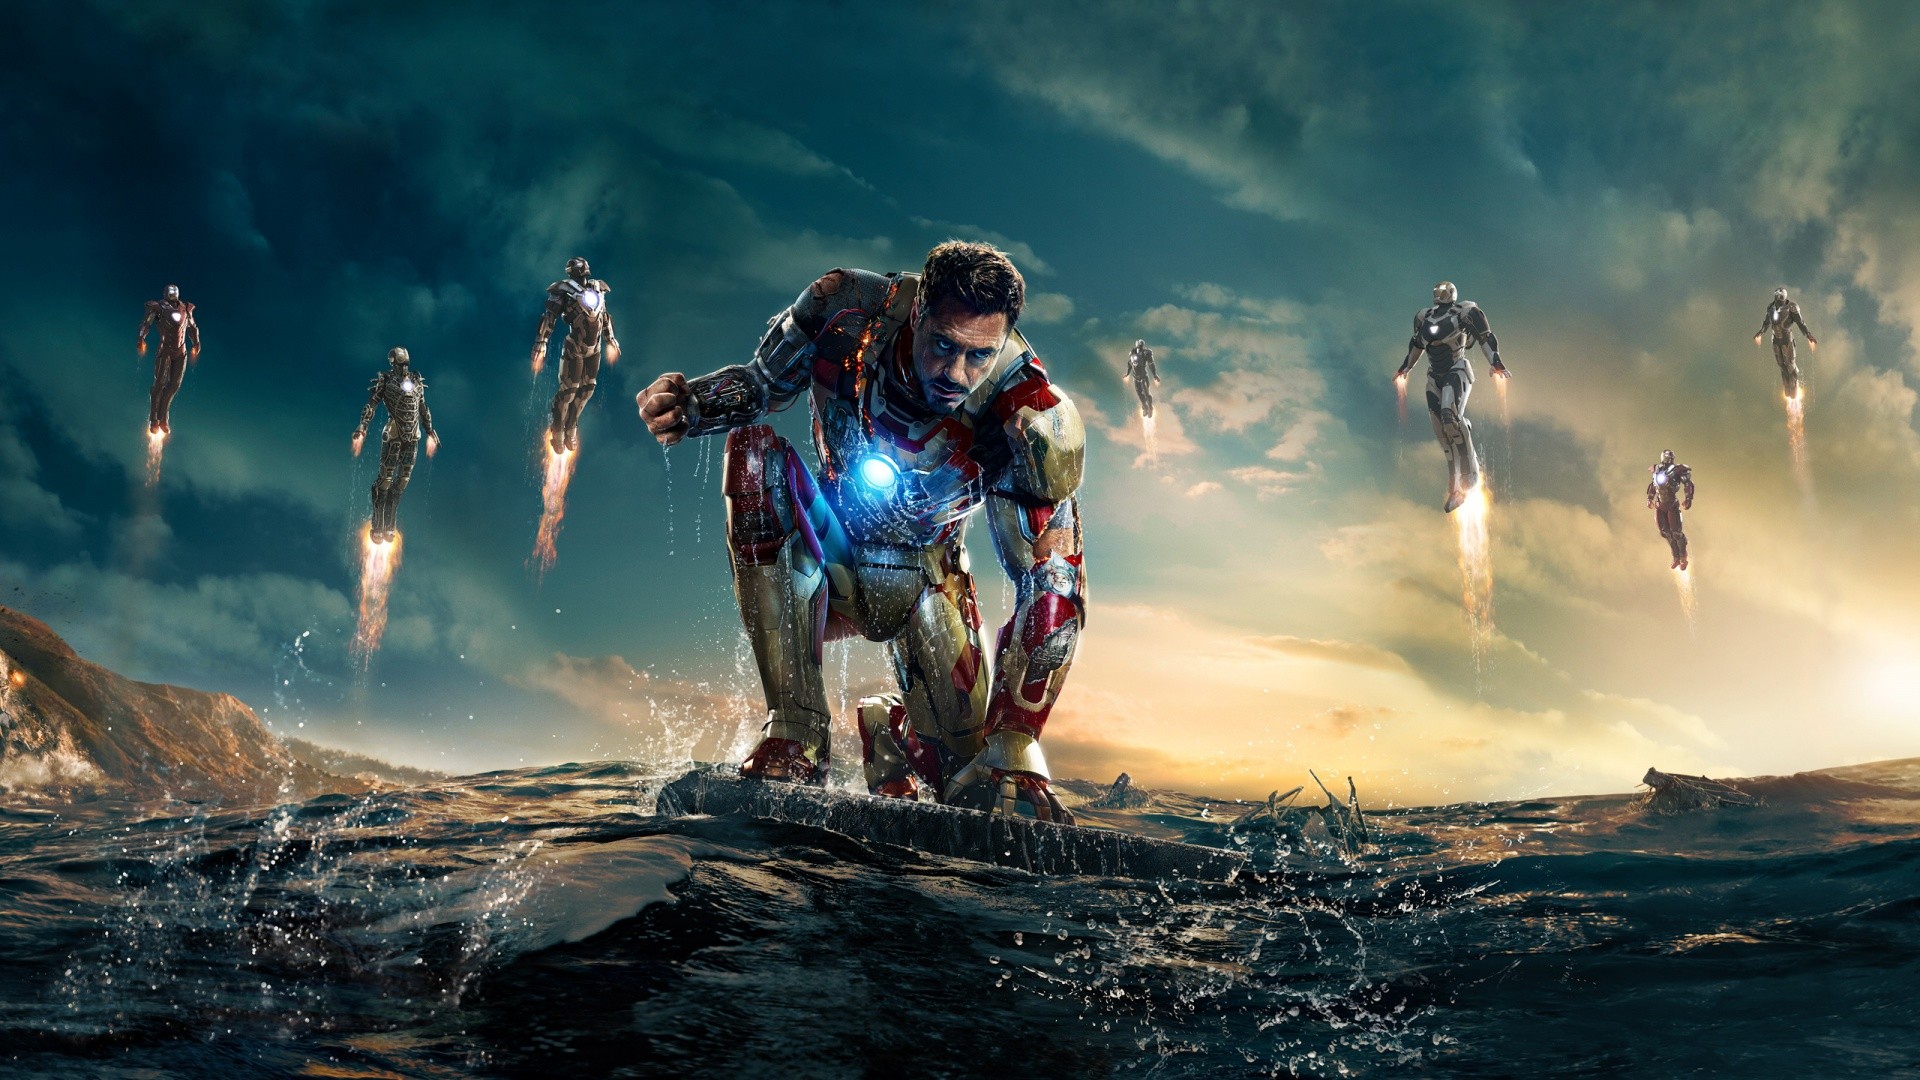 1920x1080 Top 10 HD #Iron Man #Wallpapers for #iPhone 5/5s